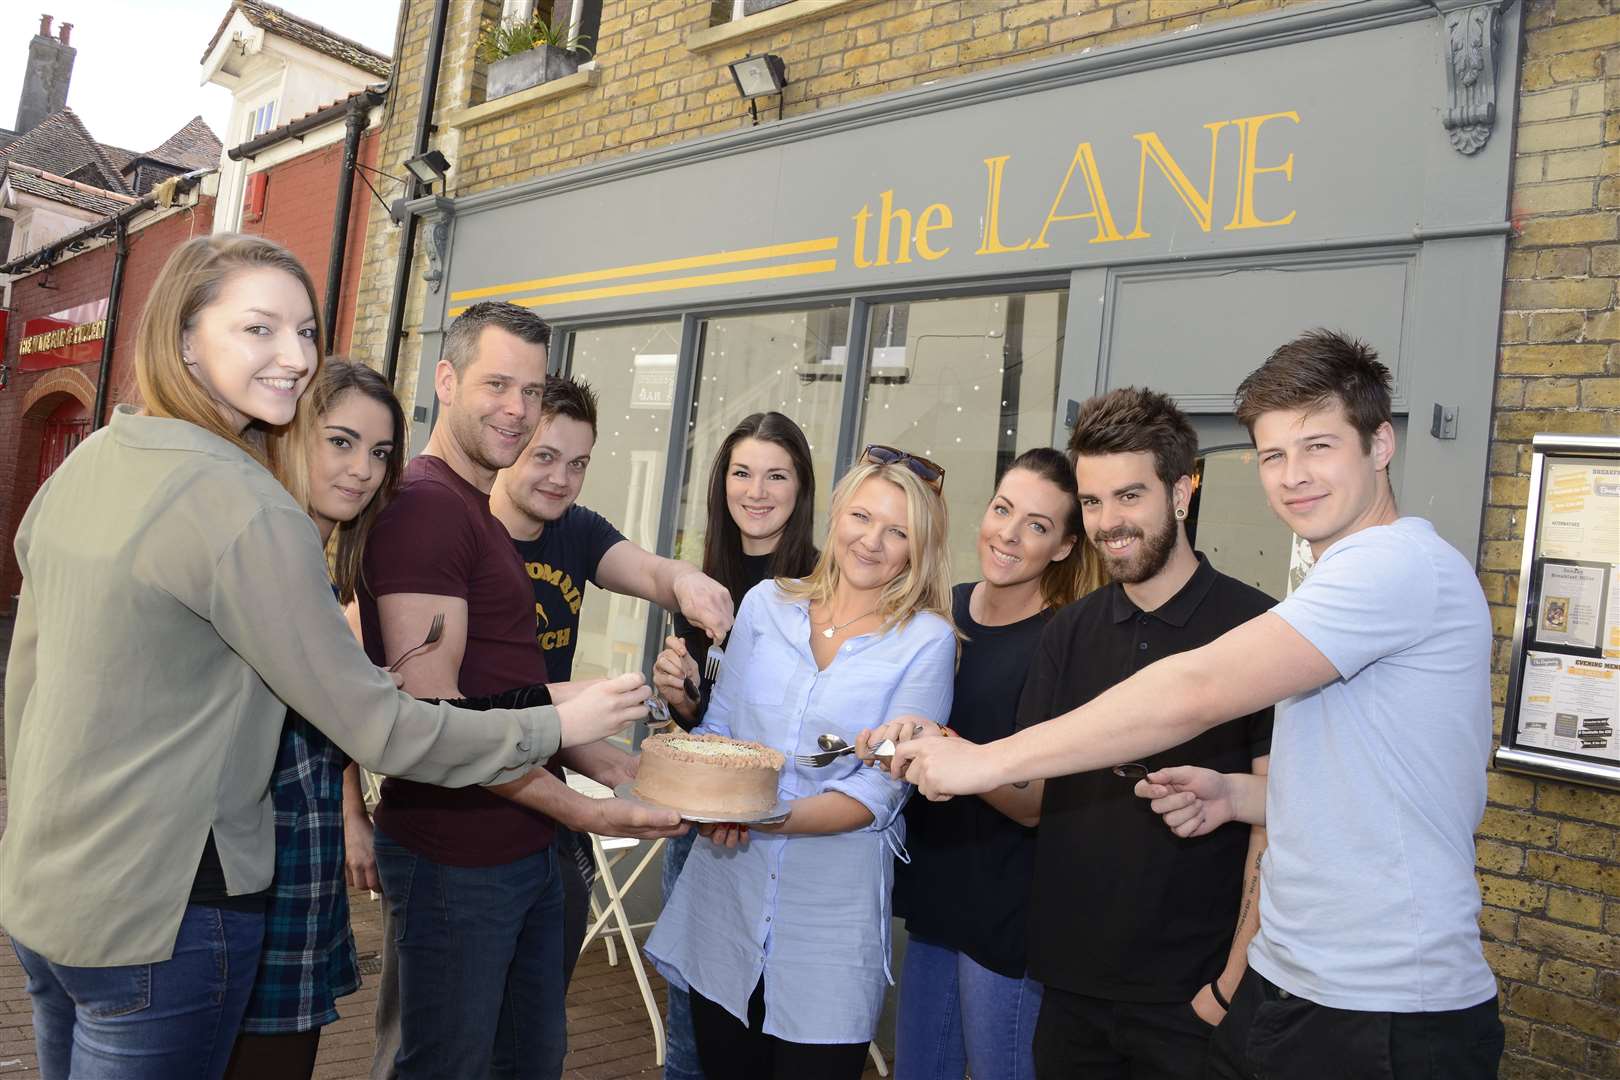 The Lane team celebrating their first year in business back in 2015